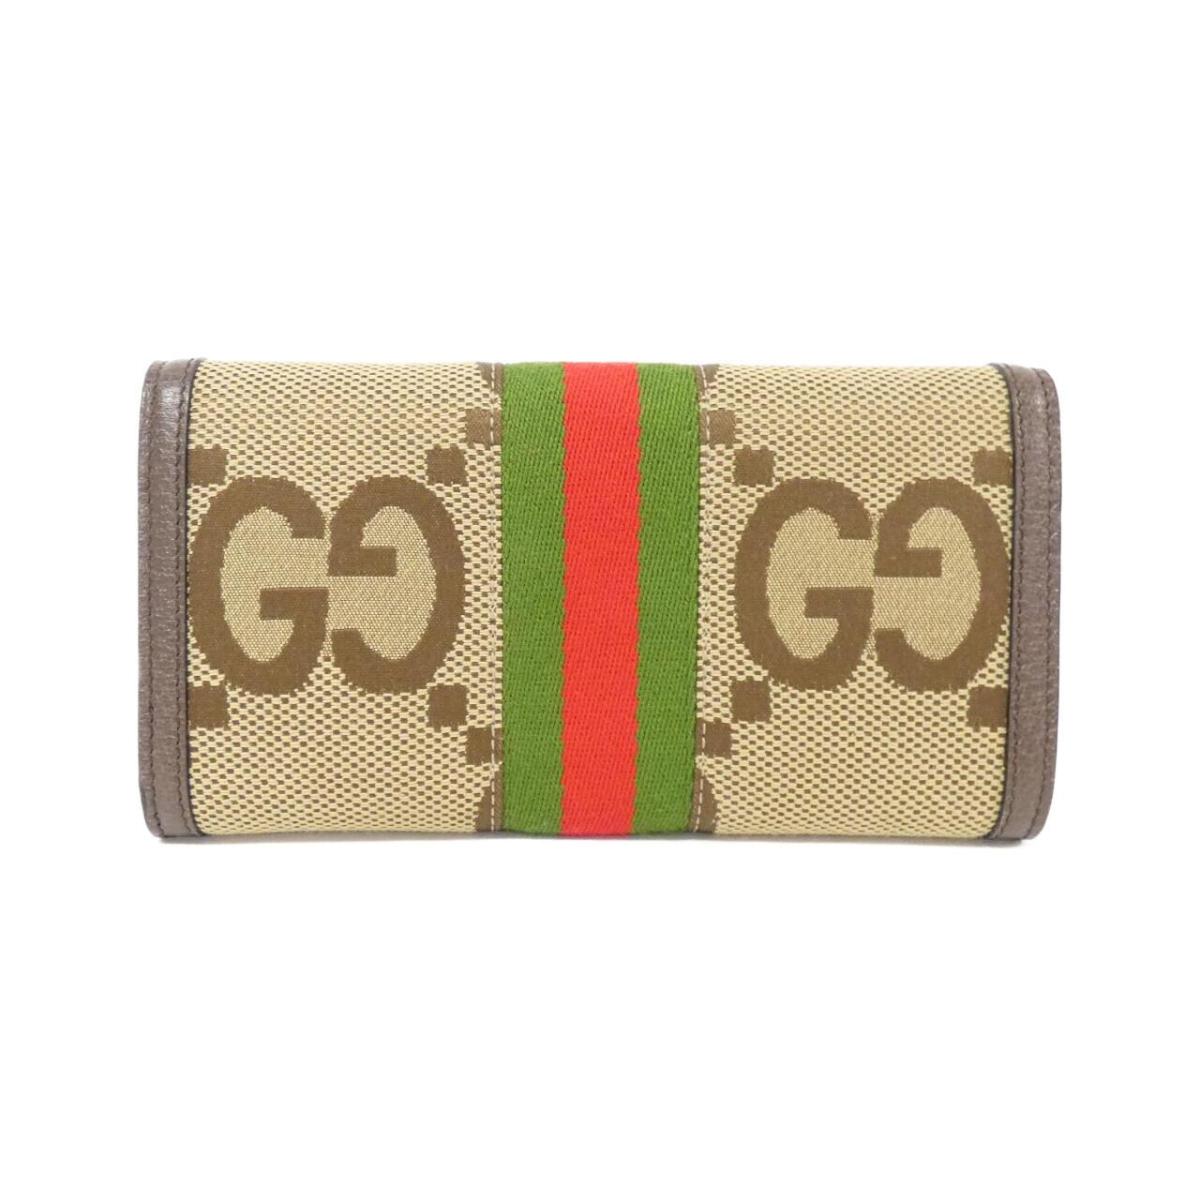 Gucci OPHIDIA 523153 UKMDG Wallet